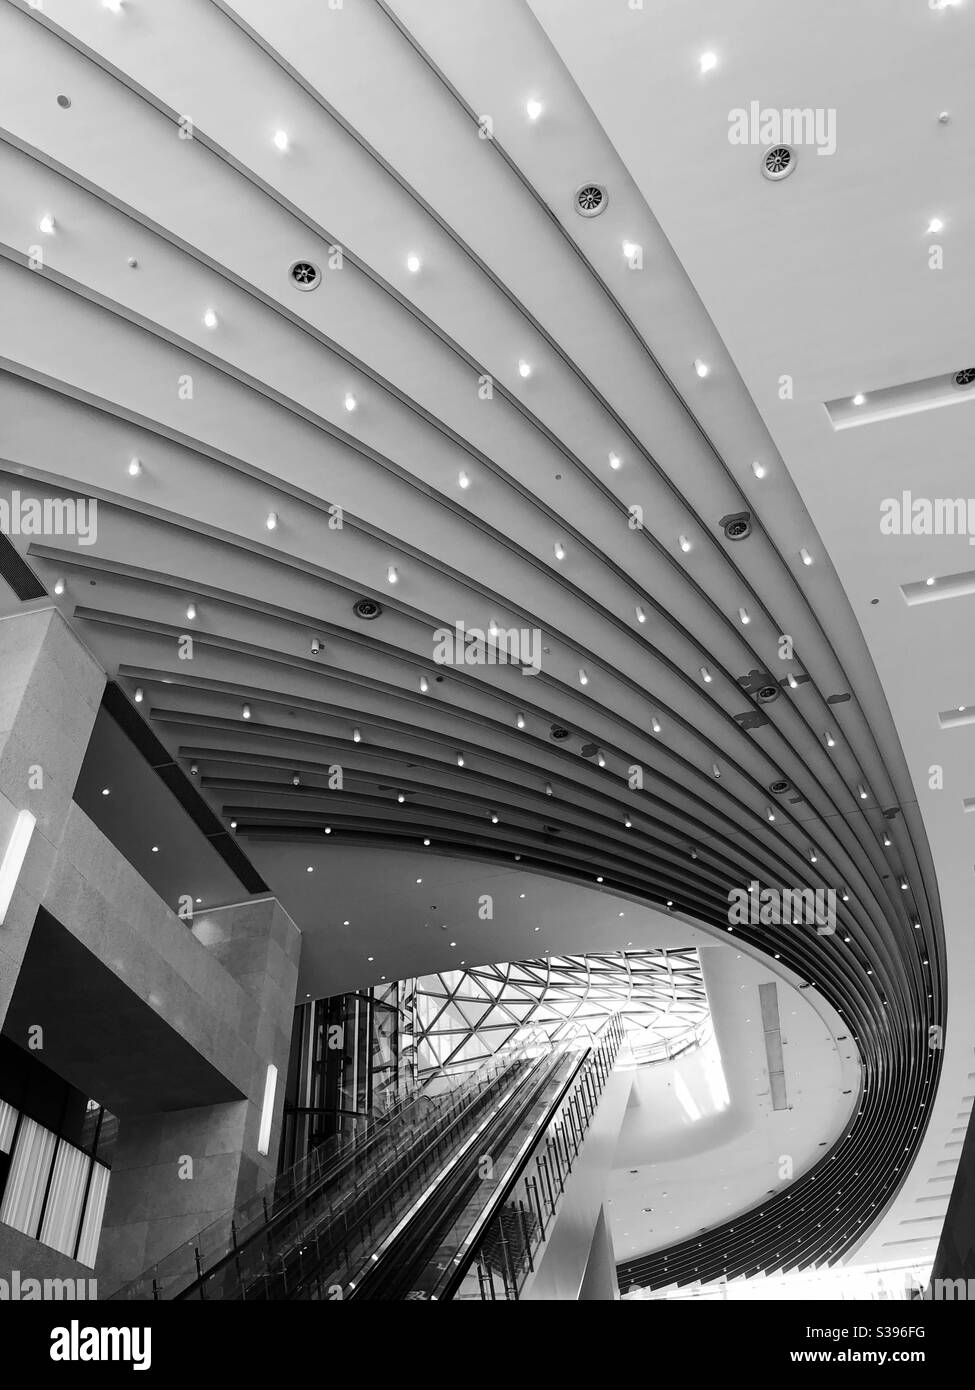 Ceiling in a mall Stock Photo